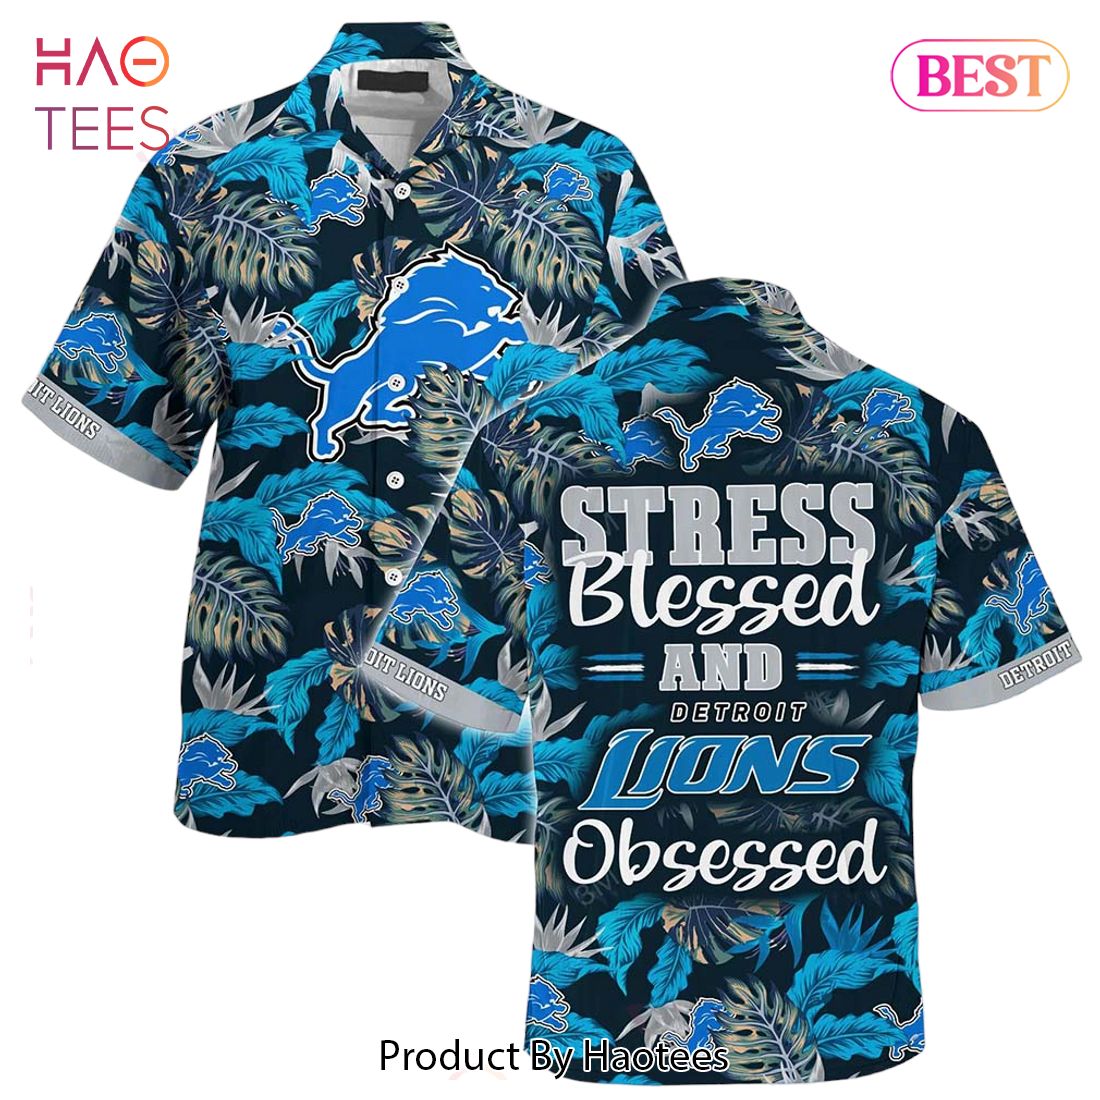 HOT TREND Detroit Lions NFL Hawaiian Shirt Stress Blessed Obsessed Summer Beach Shirt Gift For Fans Redskins